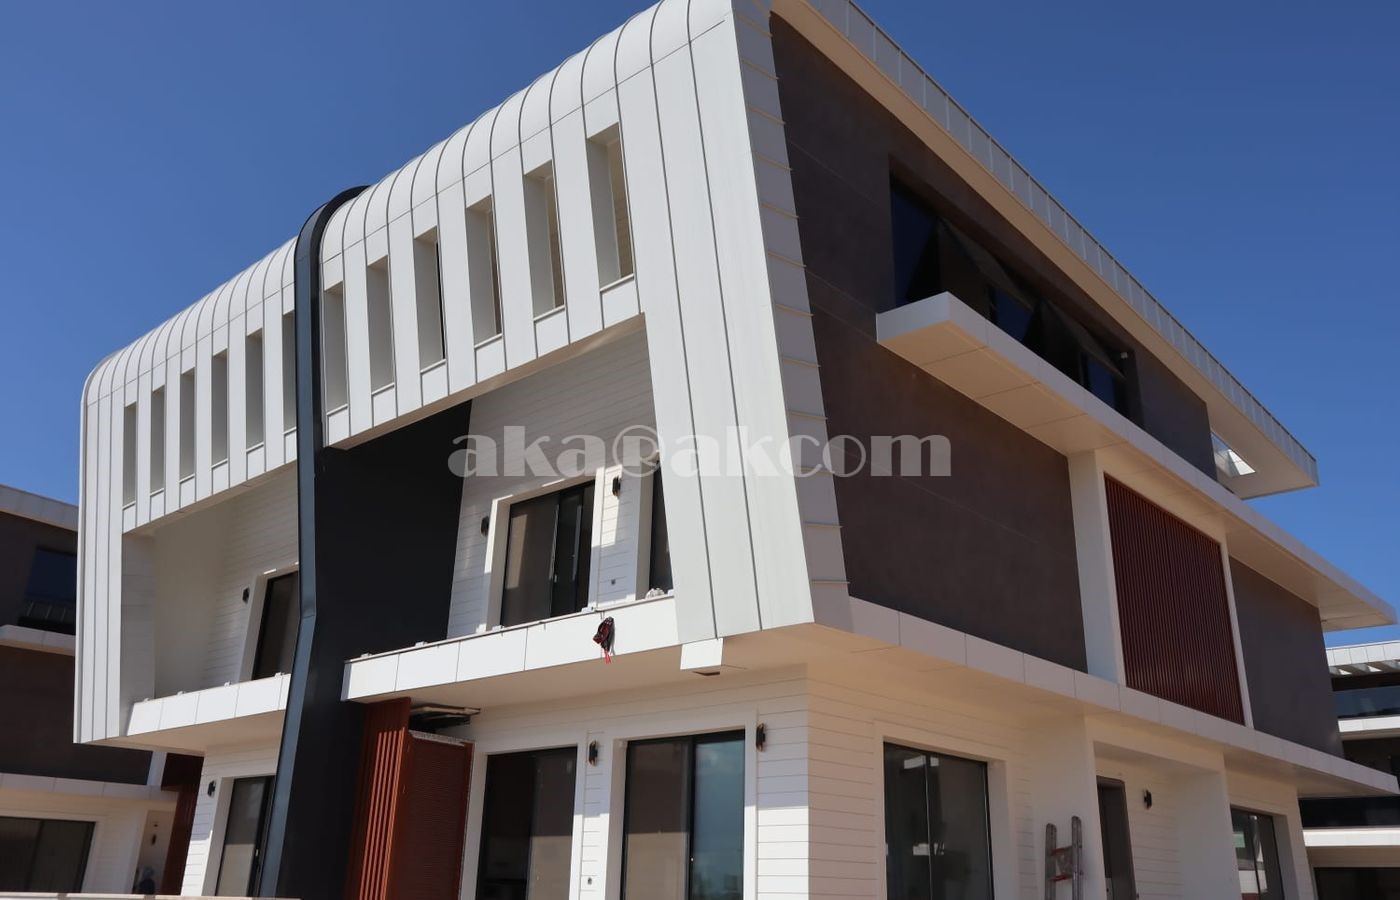 Villas suitable for Turkish Citizenship for sale in Antalya